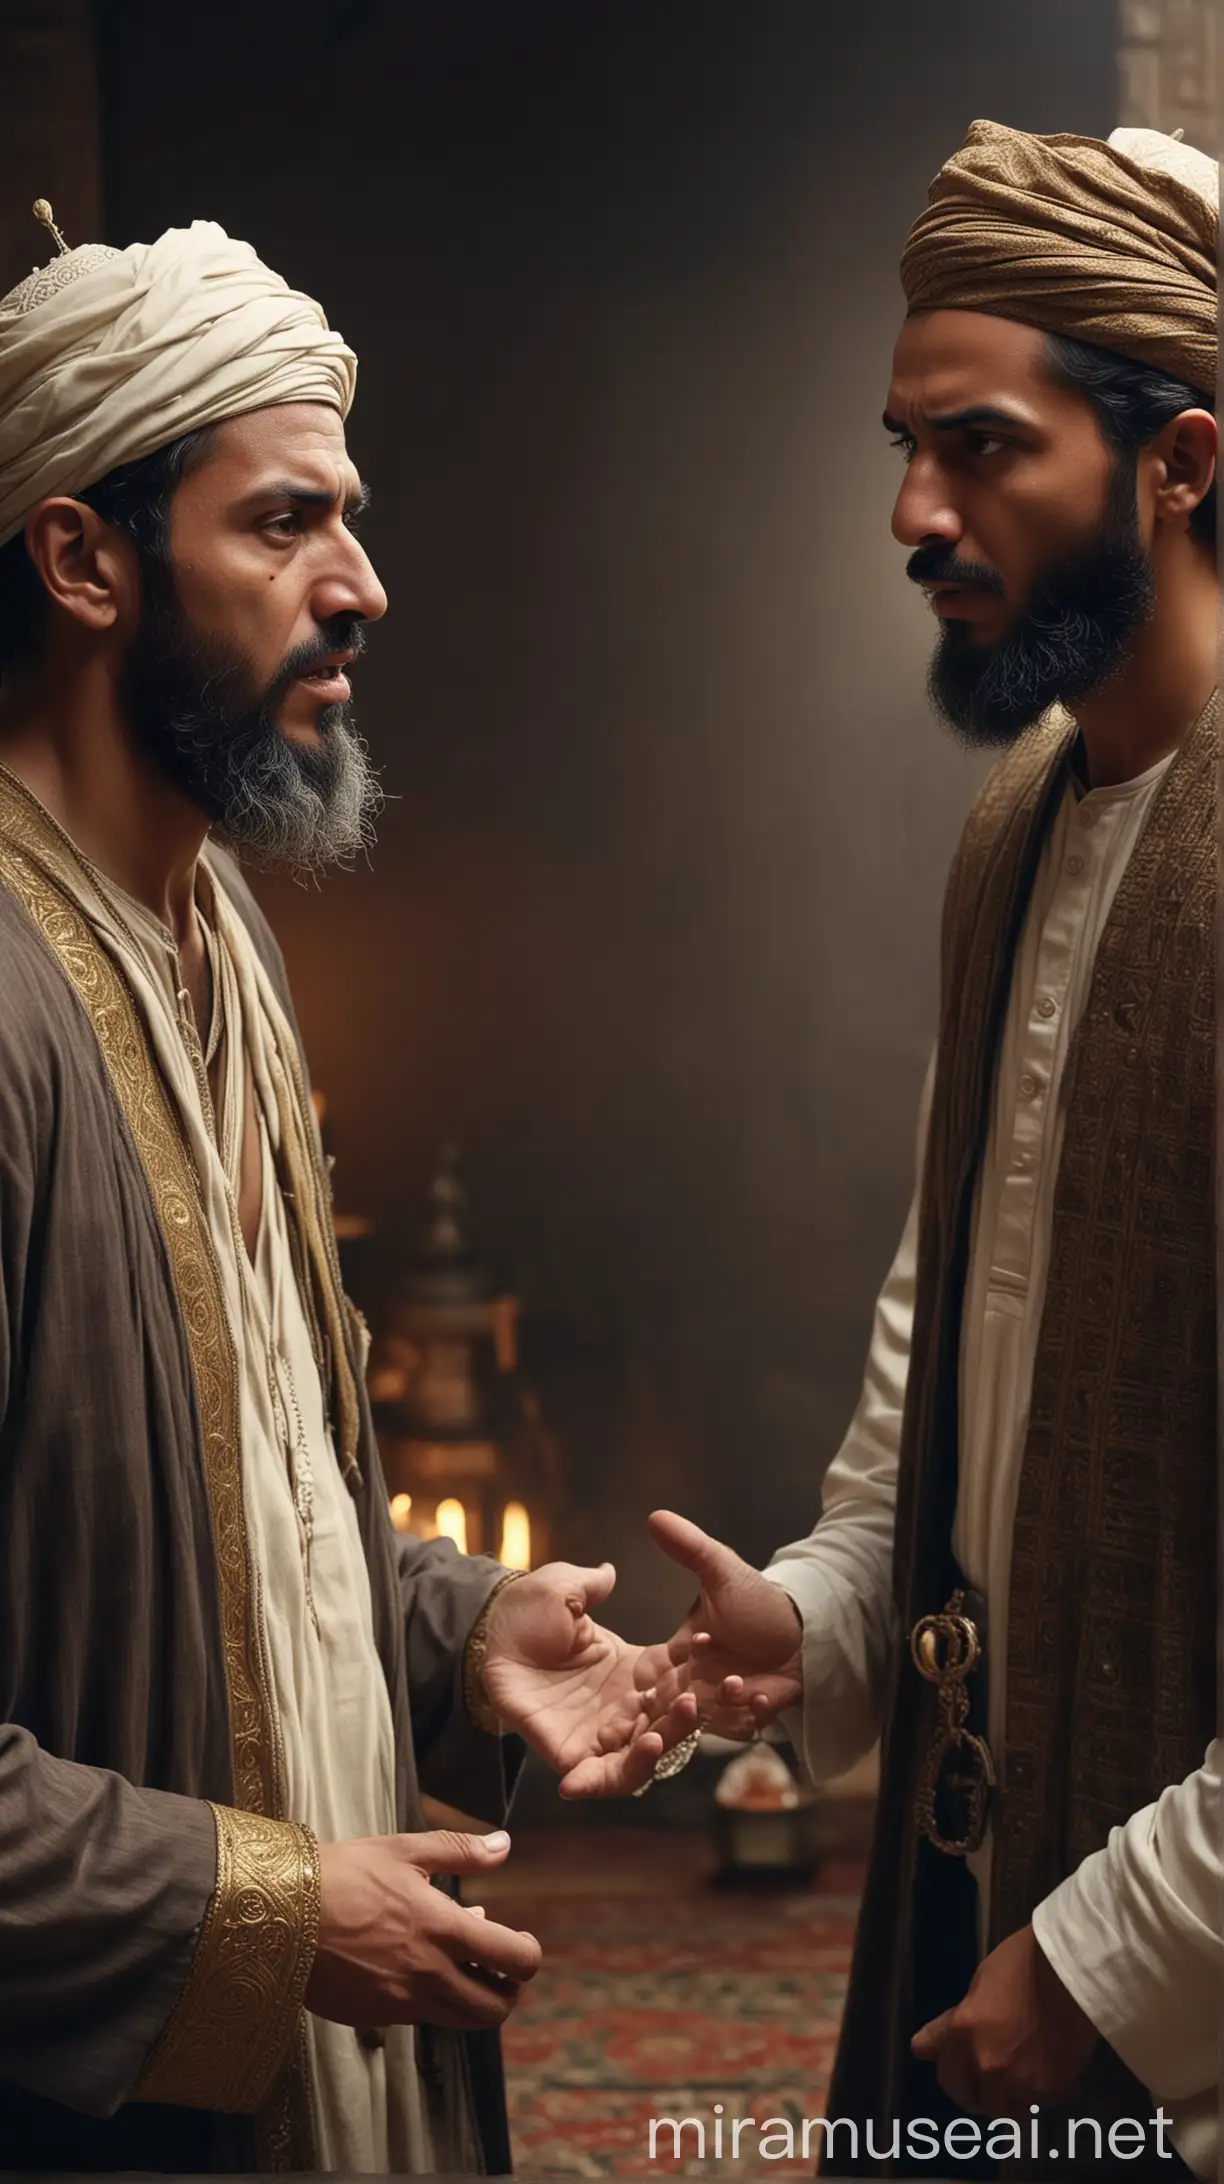 Conflict between Poor Man and Wealthy Merchant Intense Discussion in Islamic Tradition